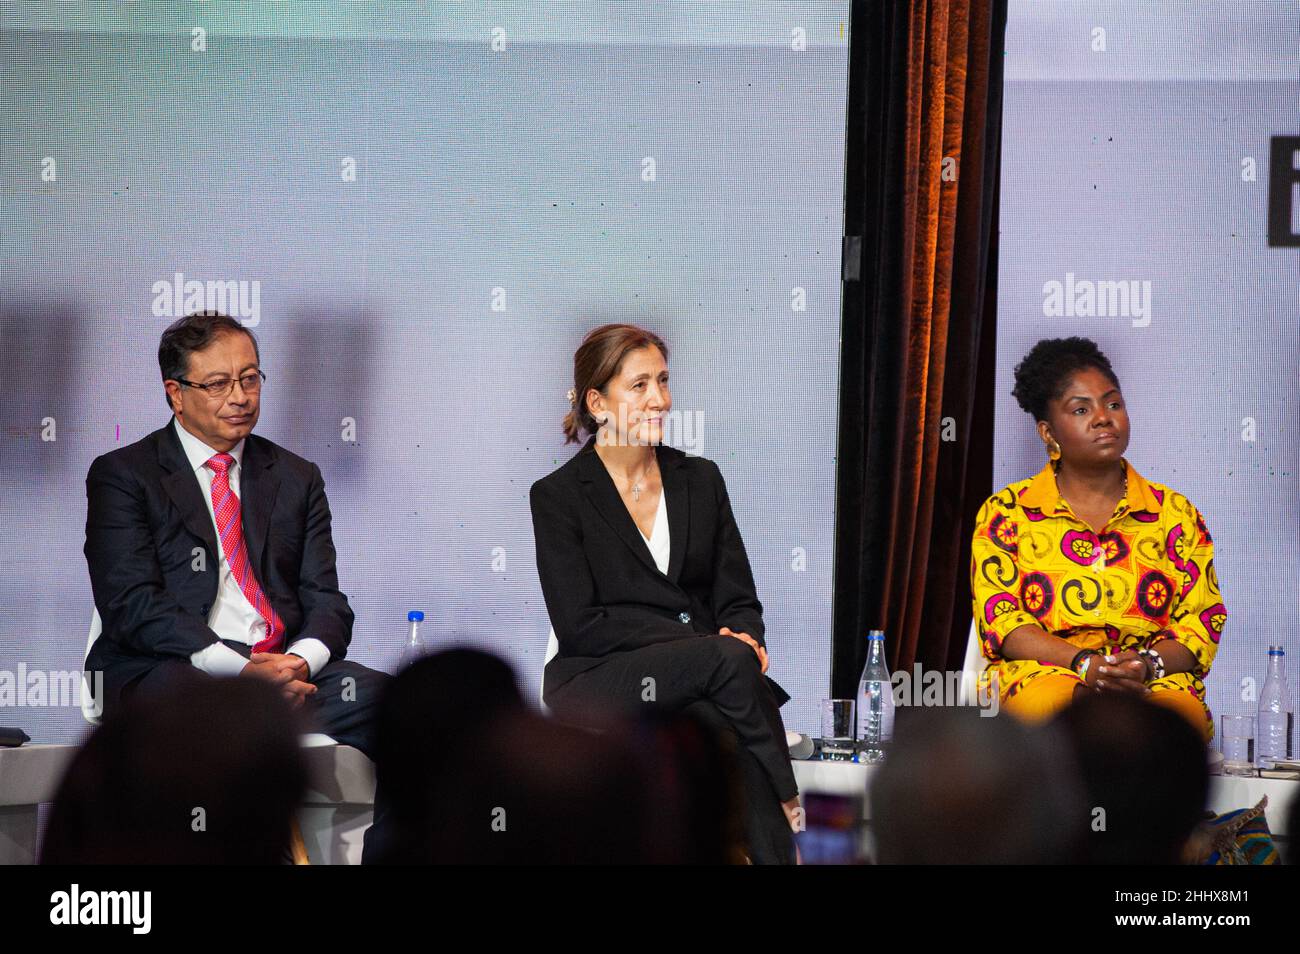 Bogota, Colombia on January 25, 2022. (Left to Right) Candidates Gustavo Petro of the alliance 'pacto Historico' French-Colombian politician 'Ingrid Betancourt of the alliance 'Coalicion Centro Esperanza' and Francia Marquez of the alliance 'Pacto Historico' during the first presidential candidates debate in Bogota, Colombia on January 25, 2022. Credit: Long Visual Press/Alamy Live News Stock Photo